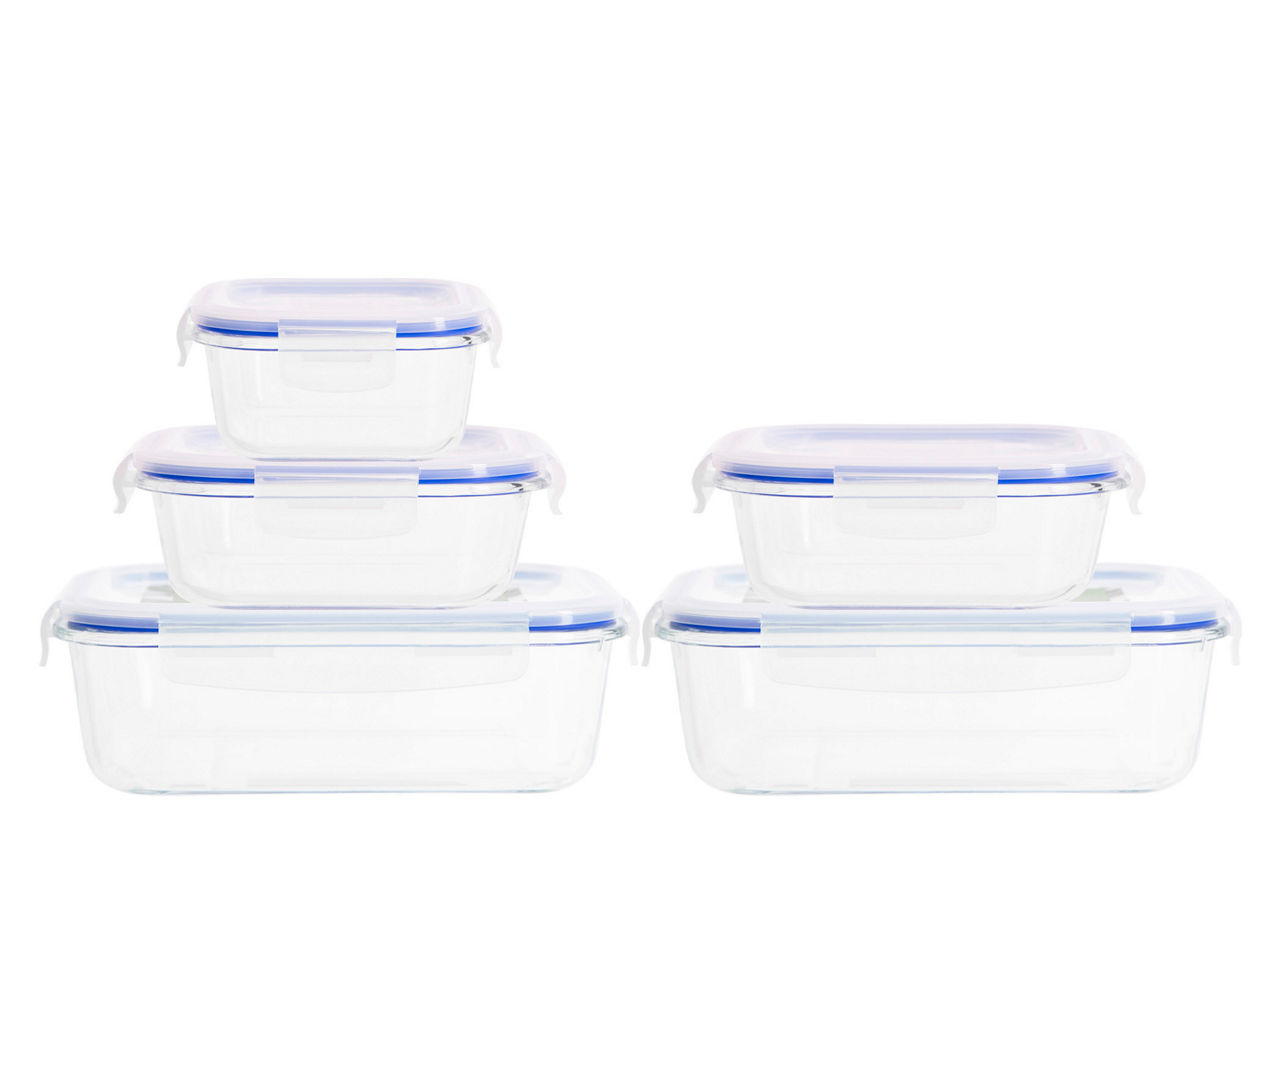 Home Essentials - Fresh & Seal 2-Compartment Glass Food Storage Container, 49 oz.